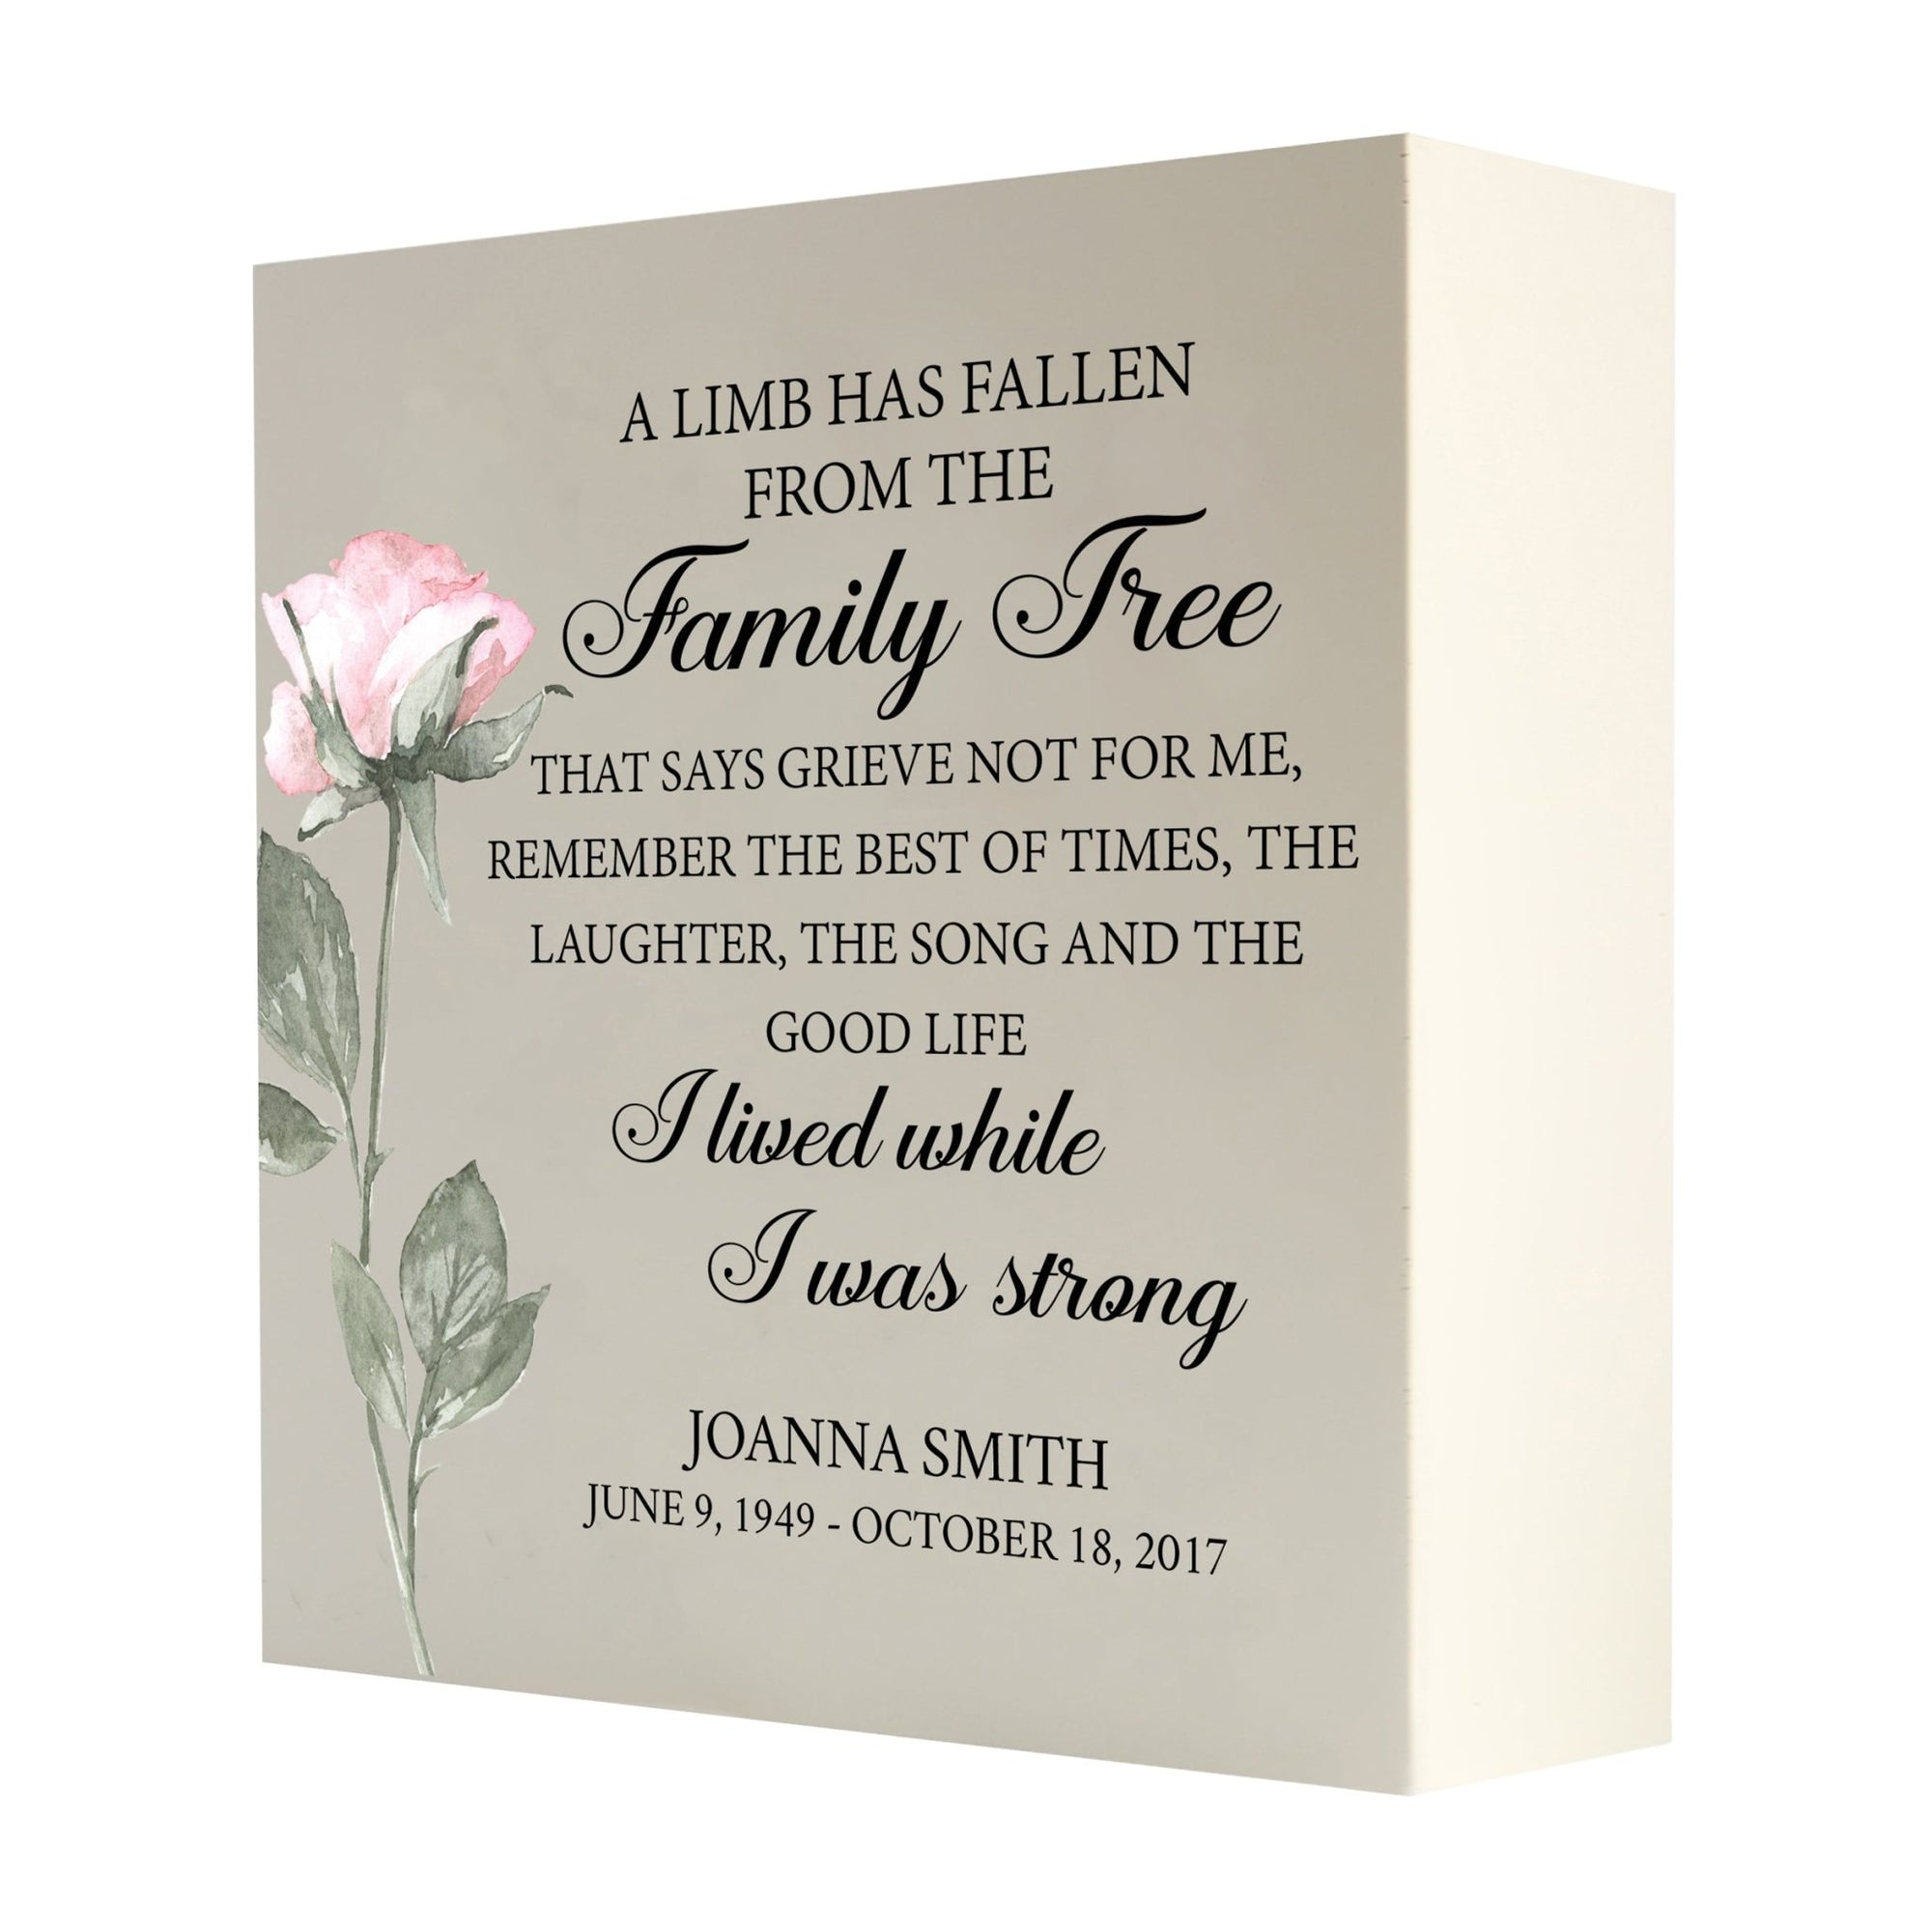 Personalized Modern Inspirational Memorial Wooden Shadow Box and Urn 10x10 holds 189 cu in of Human Ashes - A Limb Has Fallen (Song) - LifeSong Milestones